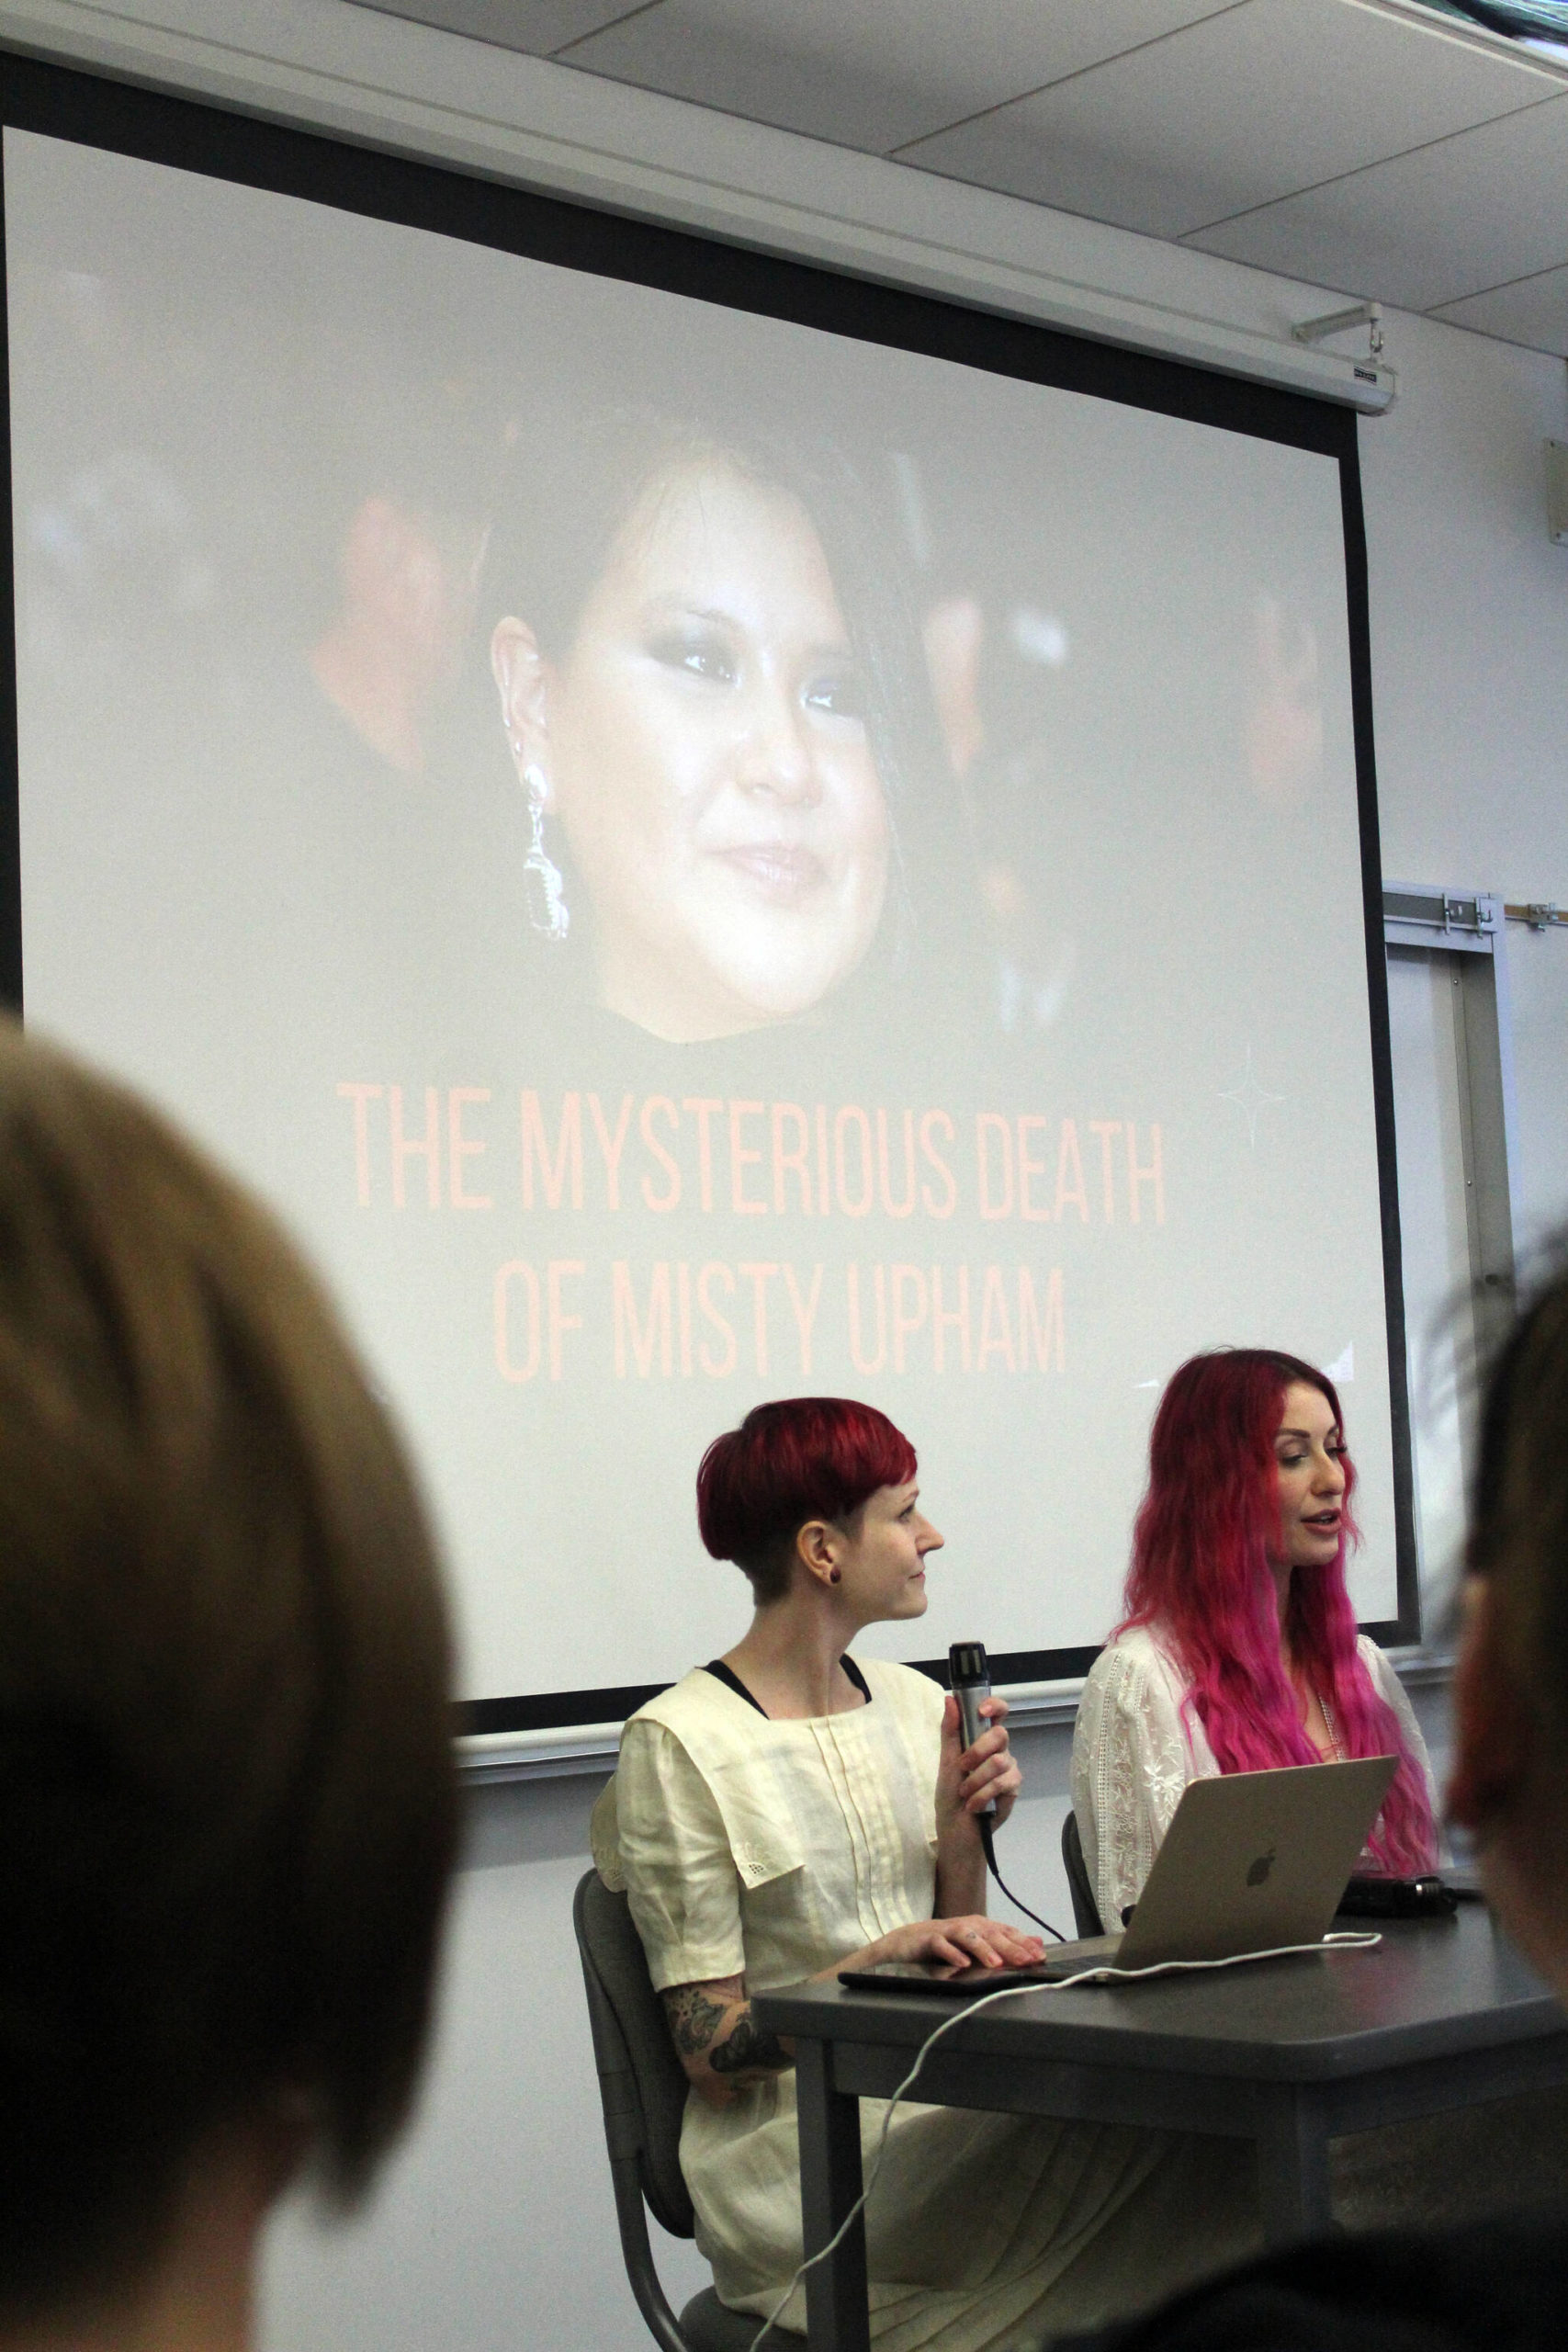 The Murder Murder News podcast, hosted by Angelina (left) and Aurora, recorded a live episode about the mysterious death of Misty Upham, an indigenous actor who died in Auburn, Washington in 2014. Photo by Bailey Jo Josie/Sound Publishing